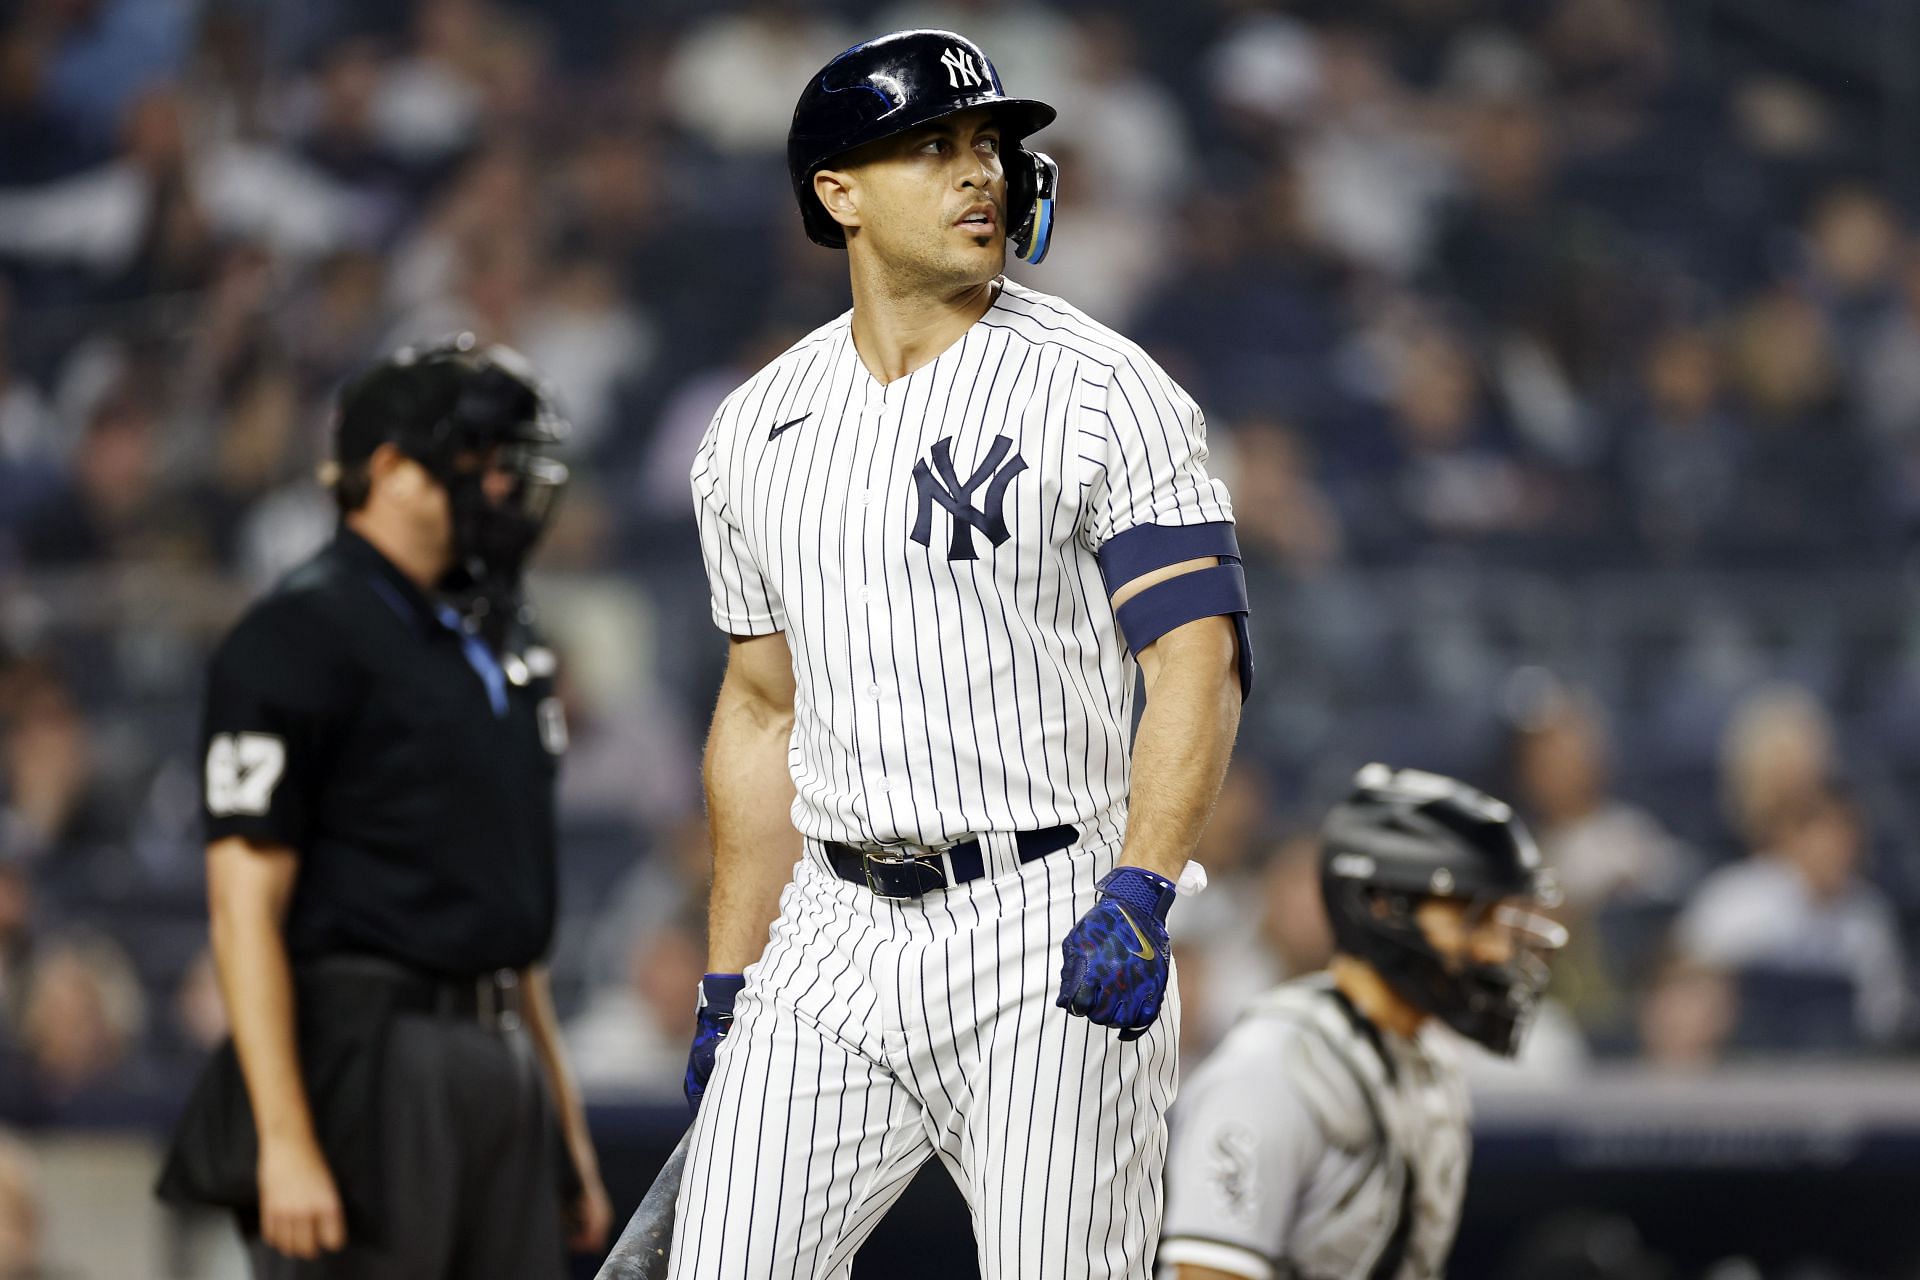 Giancarlo Stanton of the New York Yankees reacts after striking out against the Chicago White Sox at Yankee Stadium